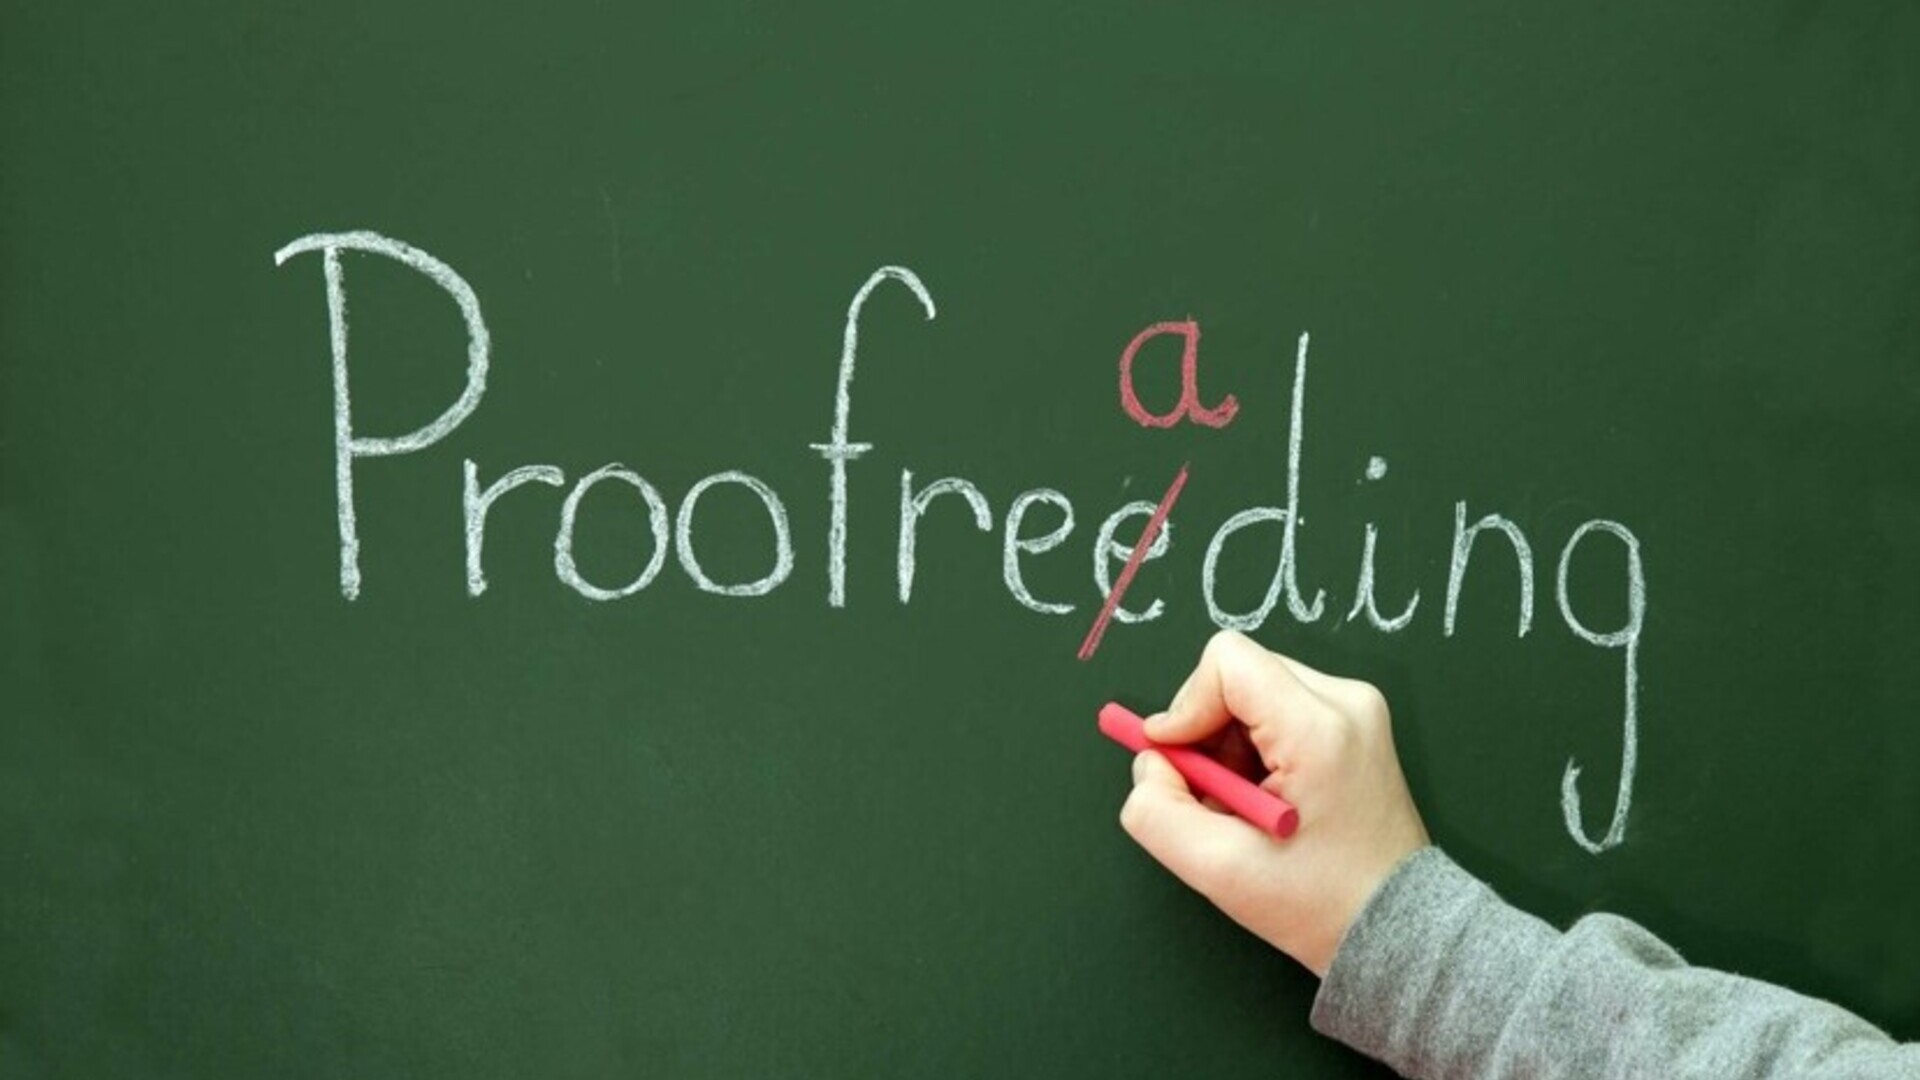 Frequently Asked Questions About Proofreading